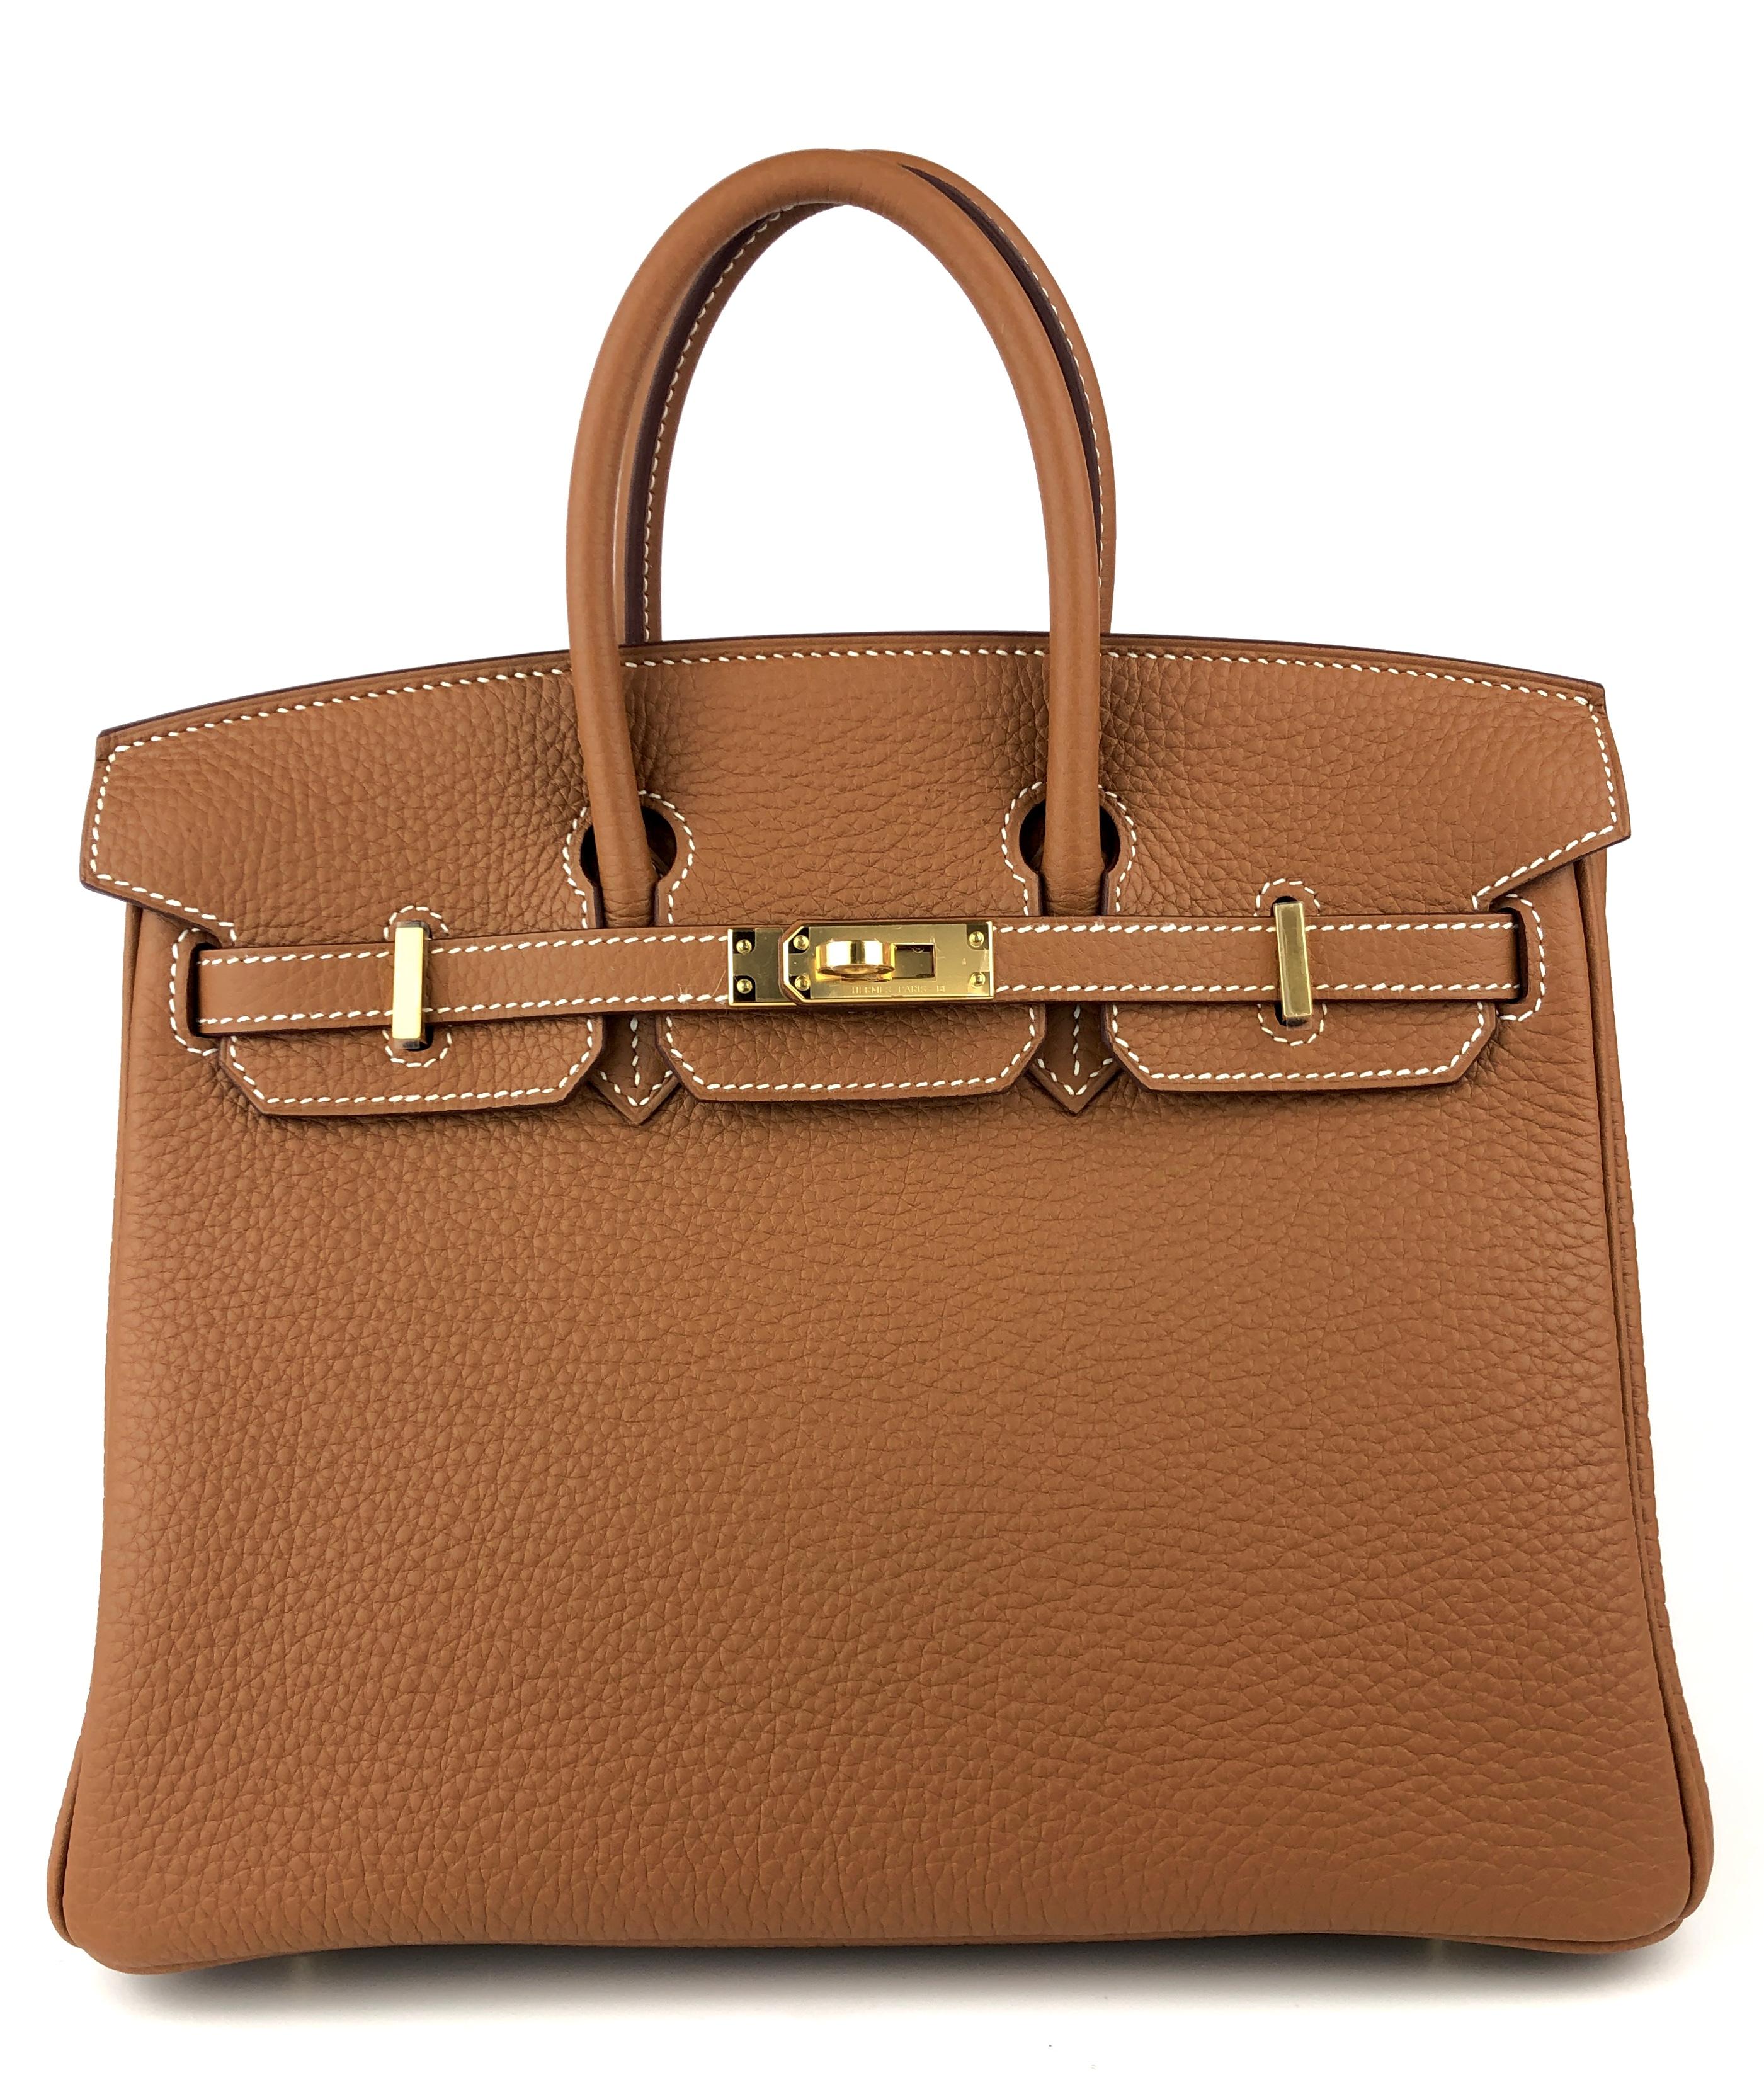 Absolutely Stunning and One The Most Coveted and Difficult to get Hermes Combos! As New  Hermes Birkin 25 Gold Togo Leather complimented by Gold Hardware. Y Stamp 2020.

Shop With Confidence from Lux Addicts. Authenticity Guaranteed! 

